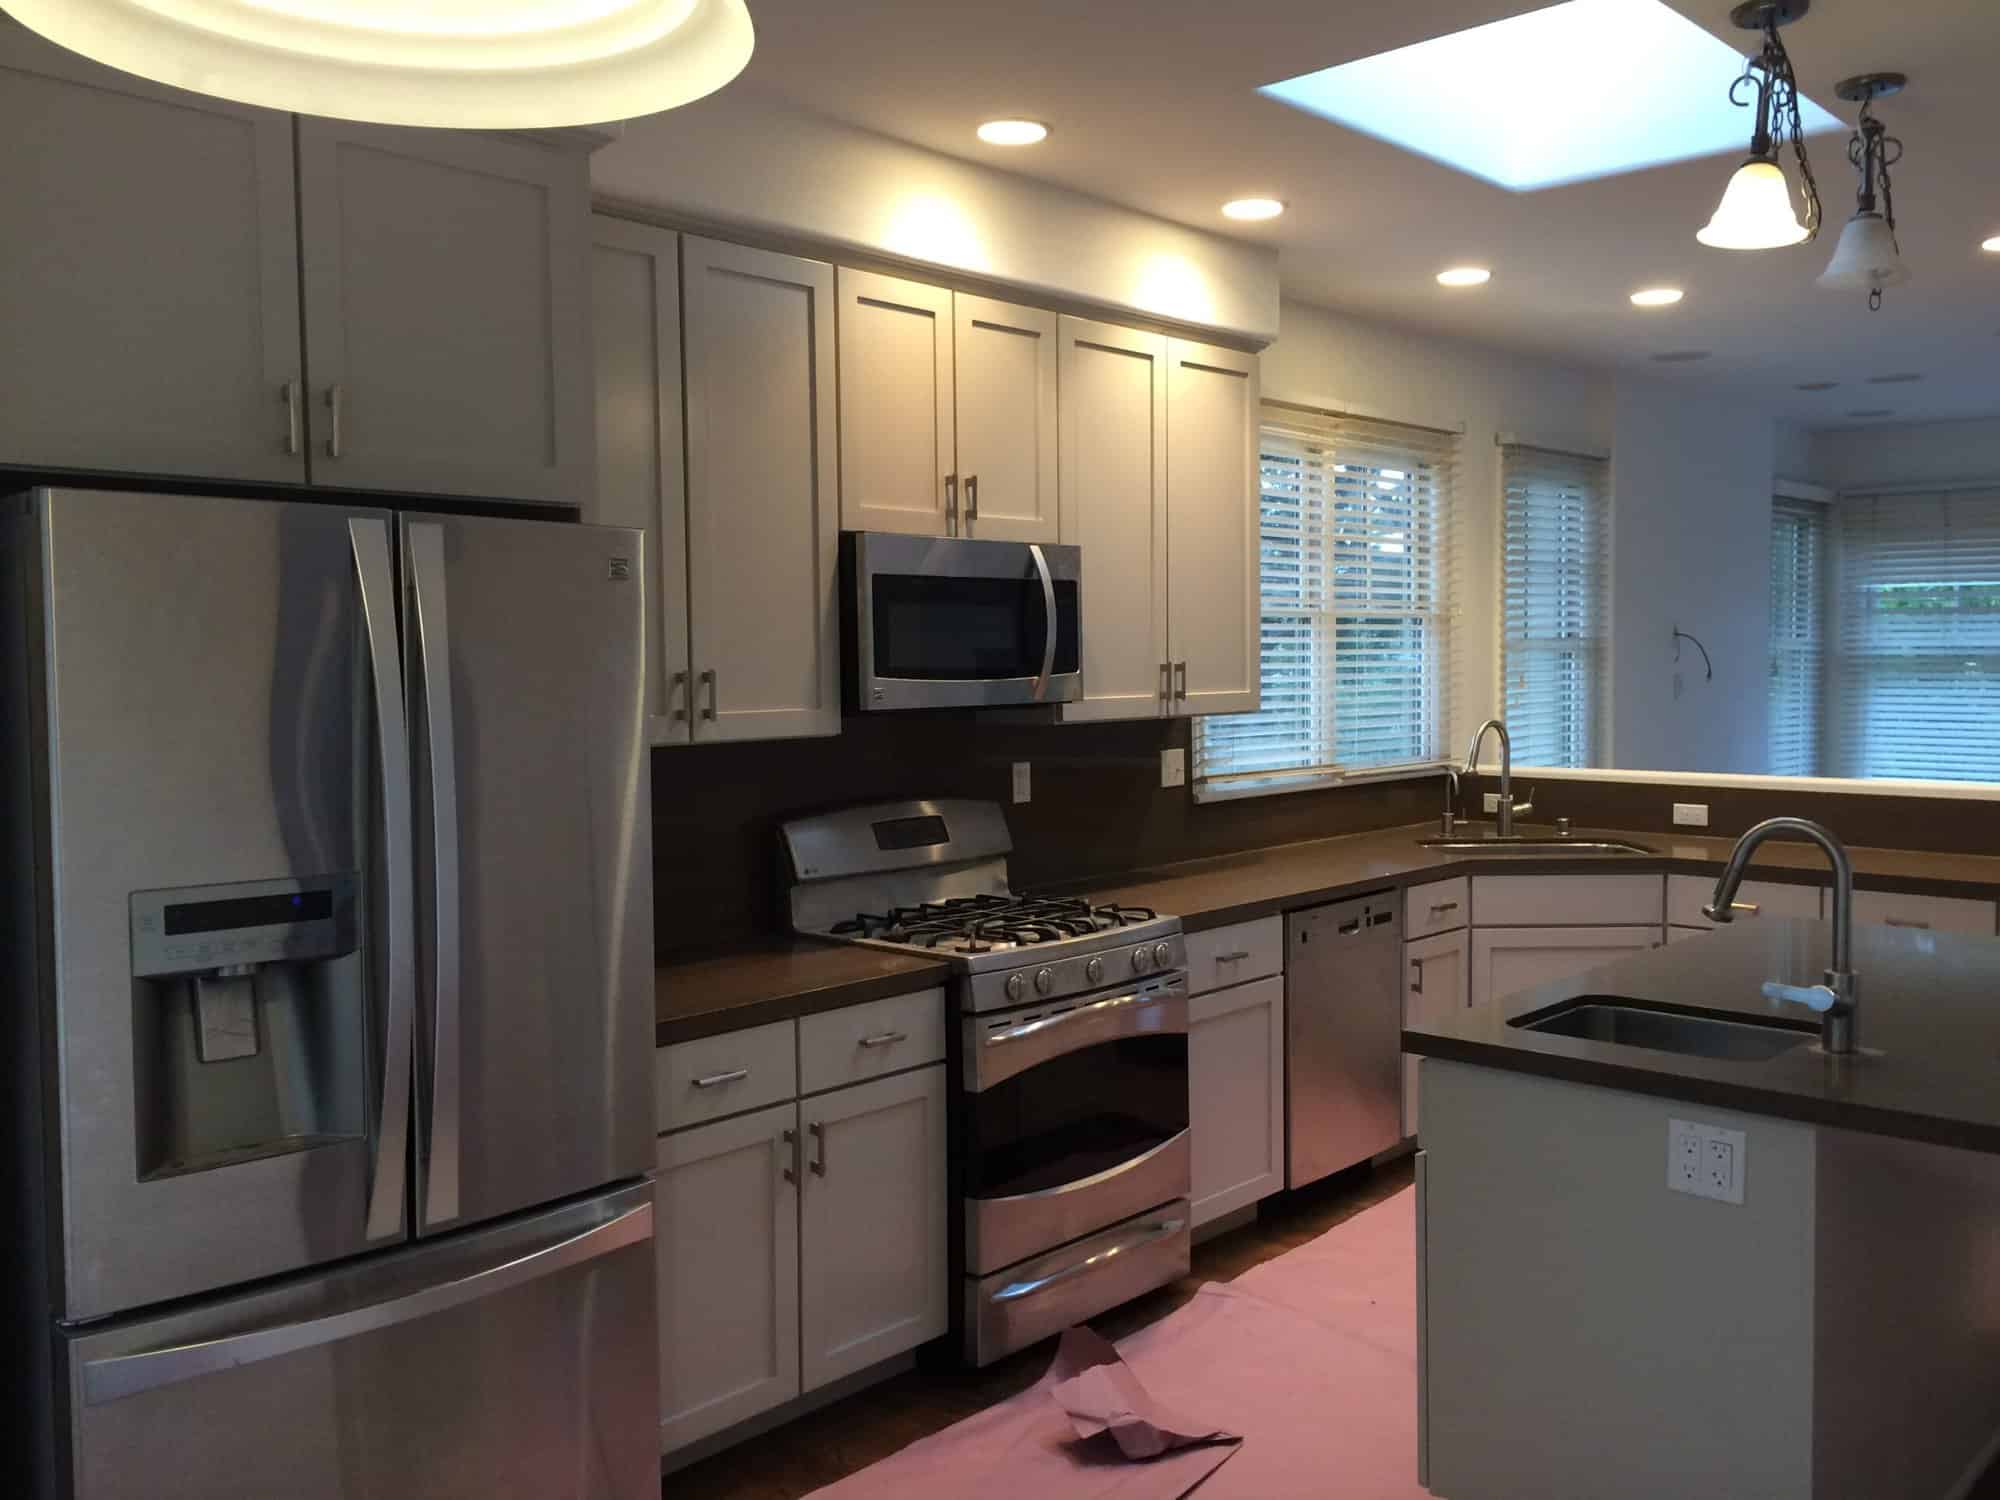 Cabinet Painting Services in the East Bay region